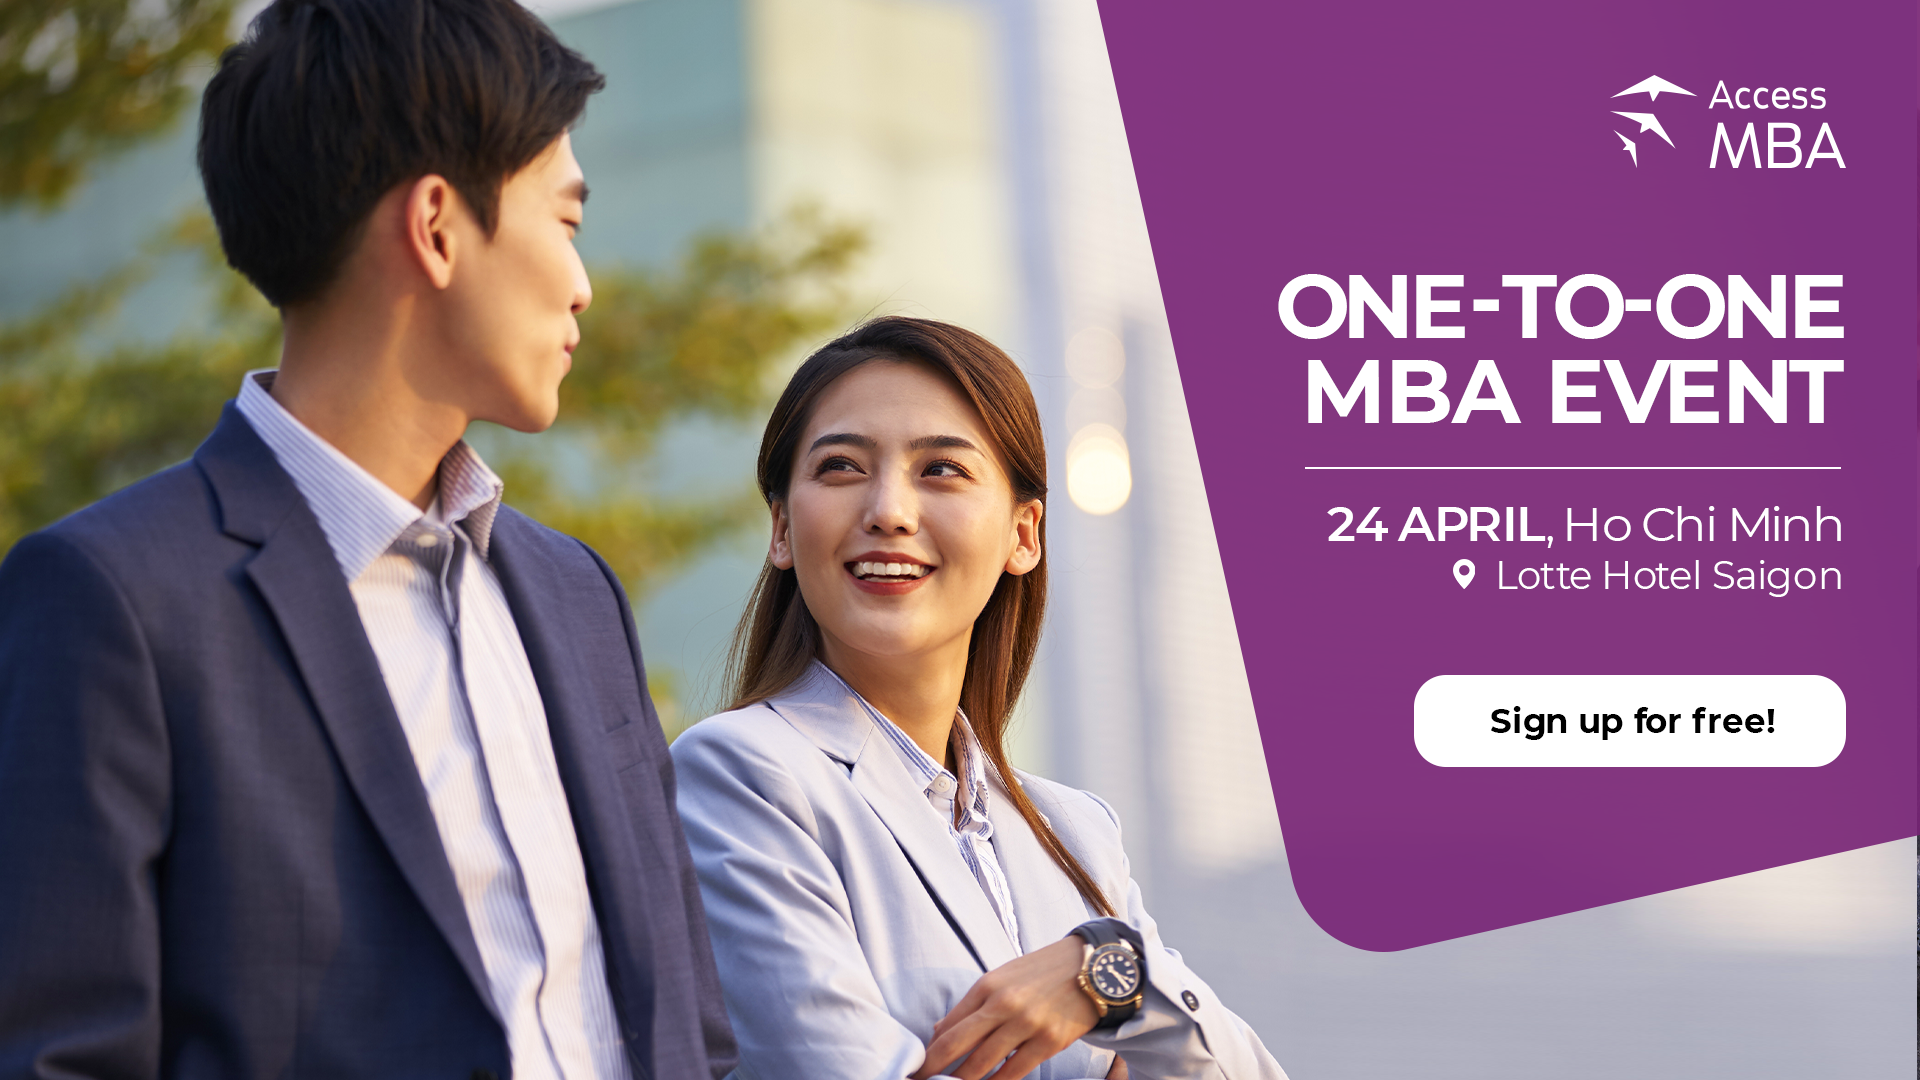 Gain a Global MBA Degree with Access MBA Ho Chi Minh on April 24th, Ho Chi Minh, Vietnam